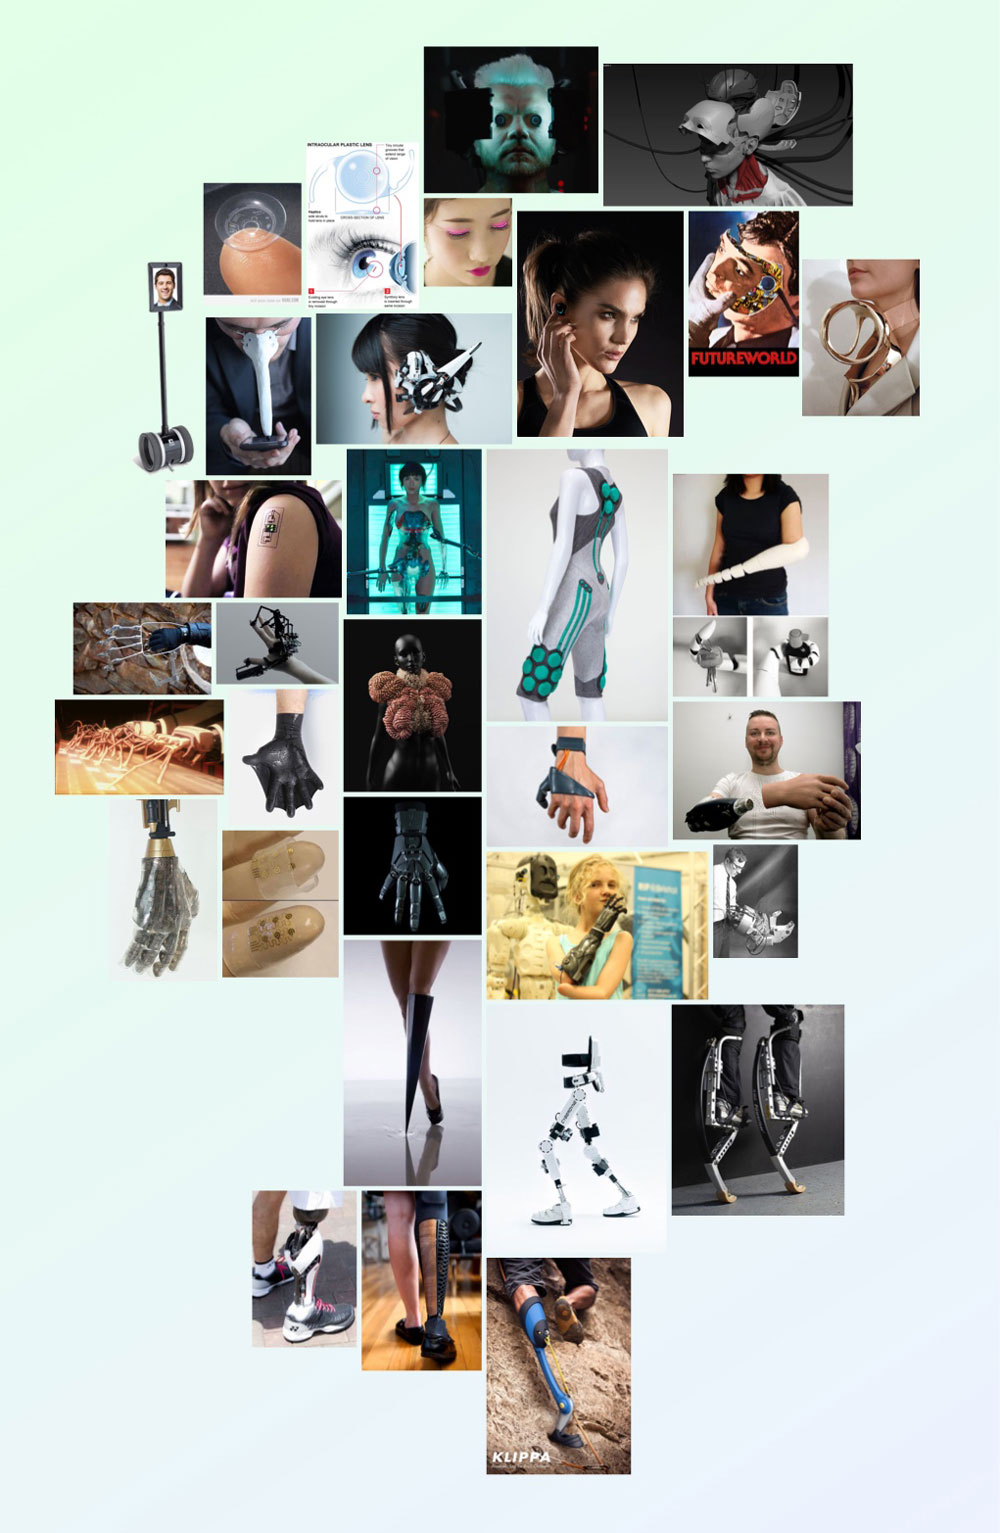 A moodboard showing the various aspects of human augmentation I was interested in